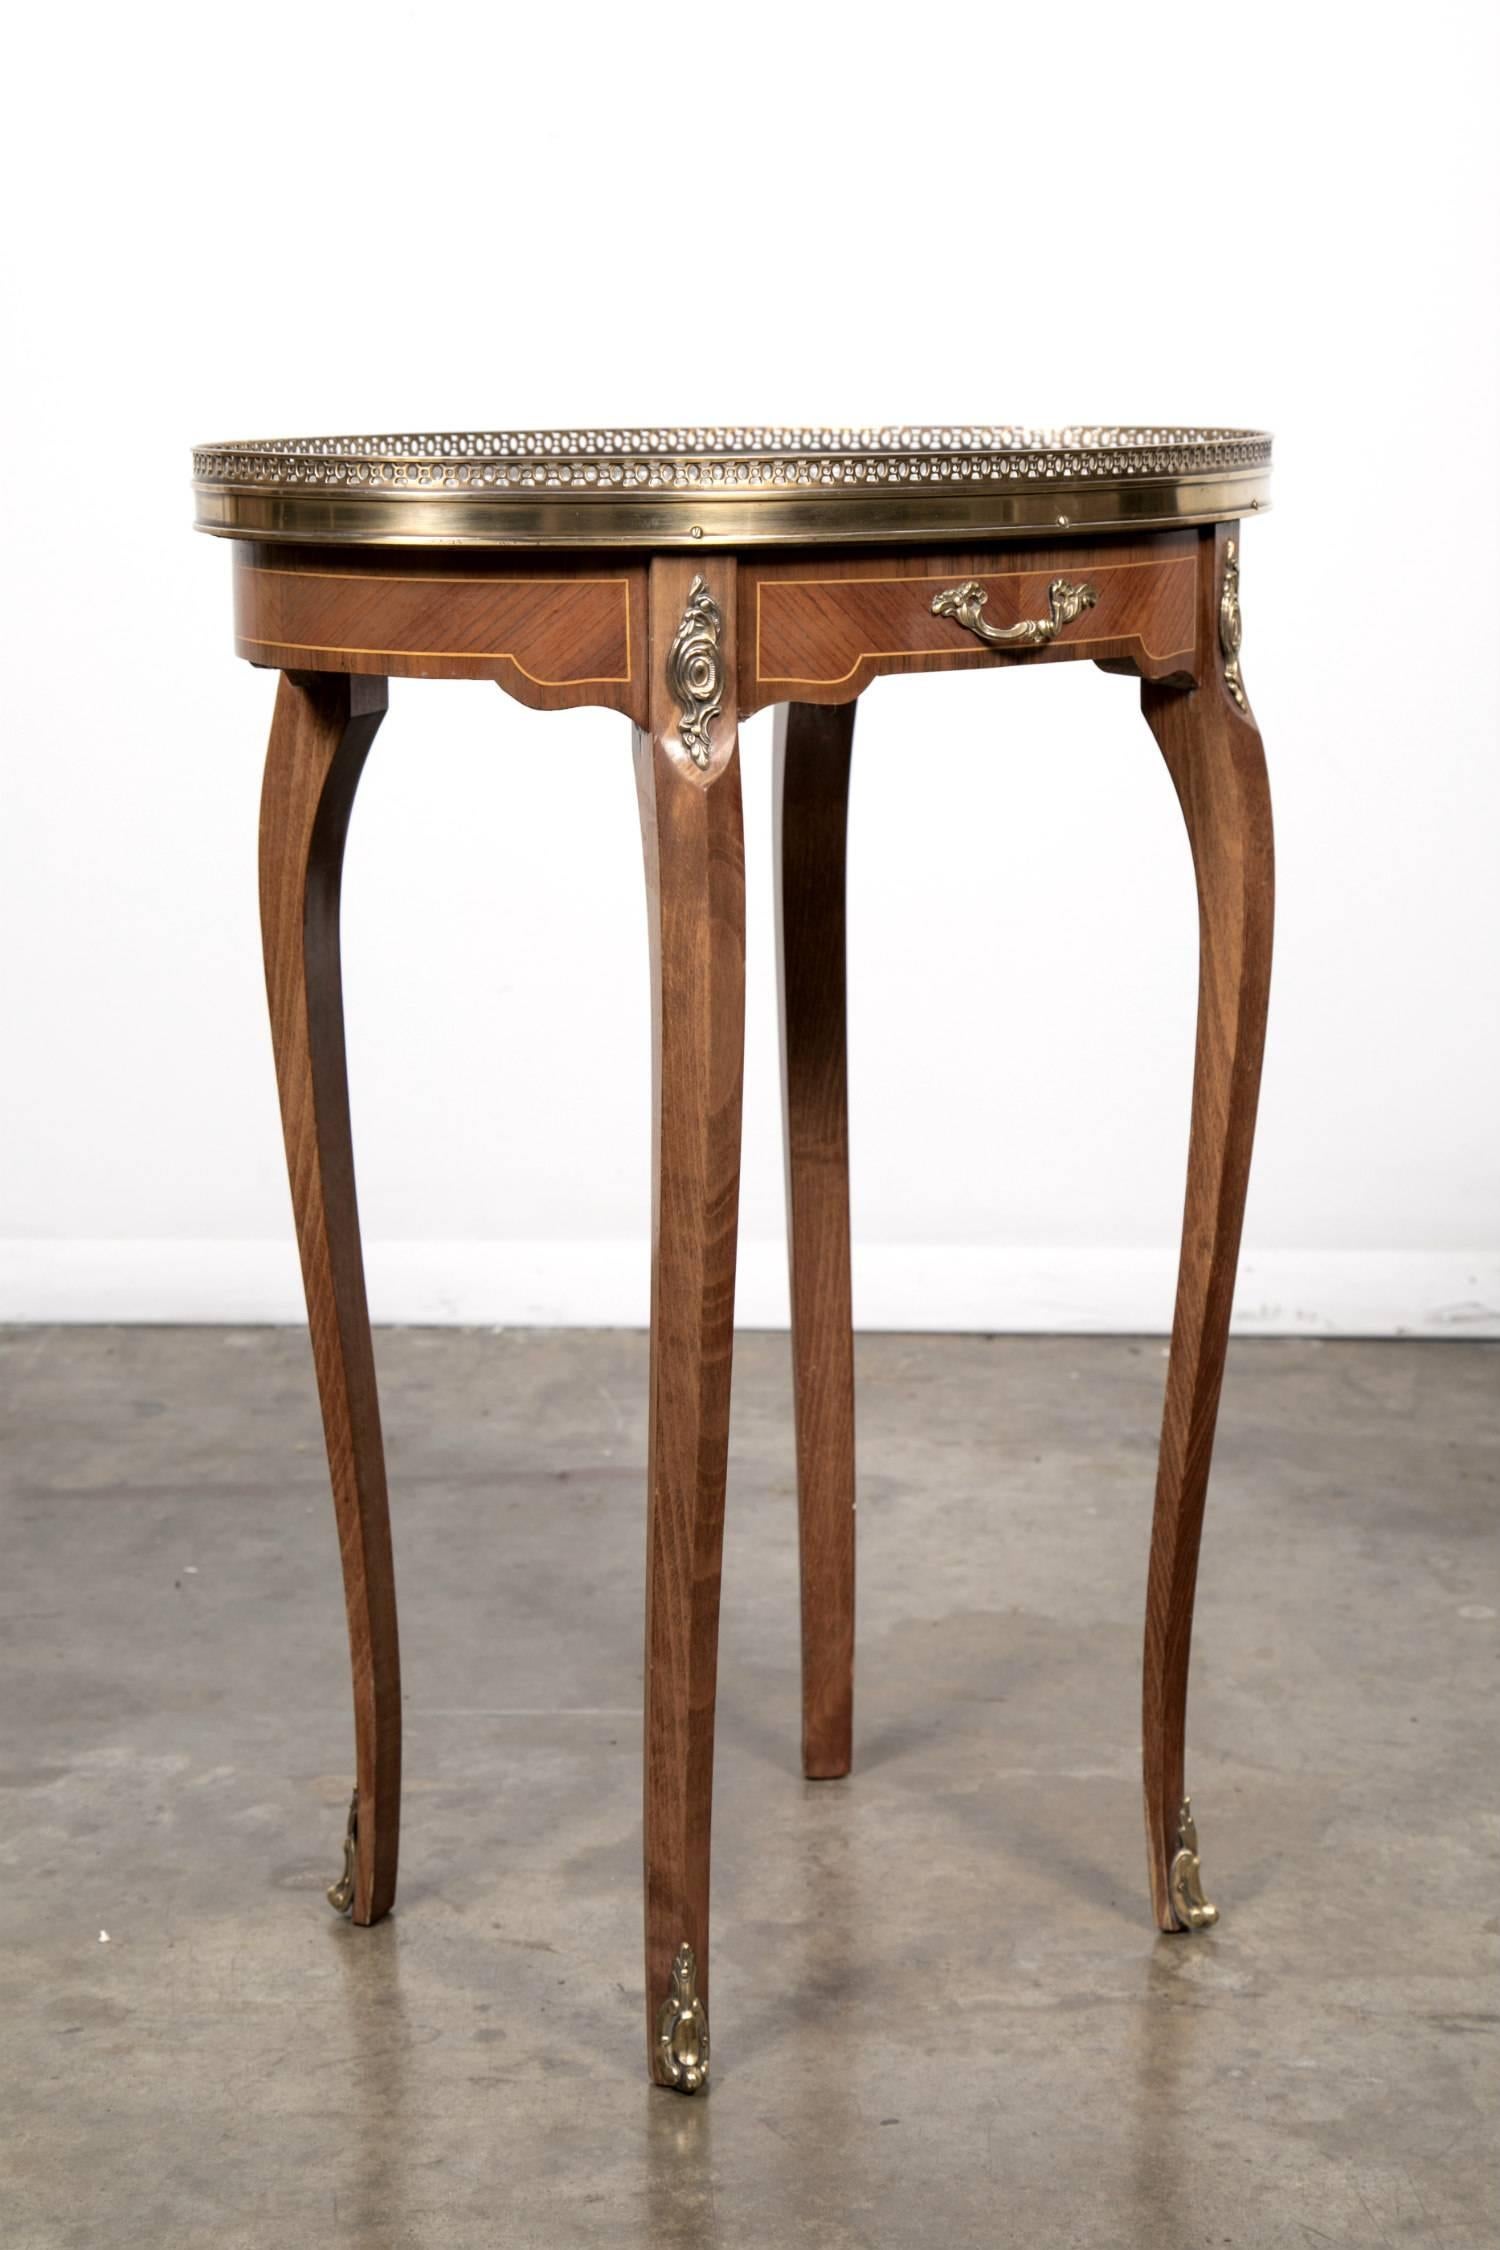 Charming Louis XV style oval kingwood bouillotte table, having a striking marble top surrounded by a pierced gallery. Features a carved apron with inlay, ormolu leg mounts and a single drawer. Raised on graceful cabriole legs ending in bronze sabots.